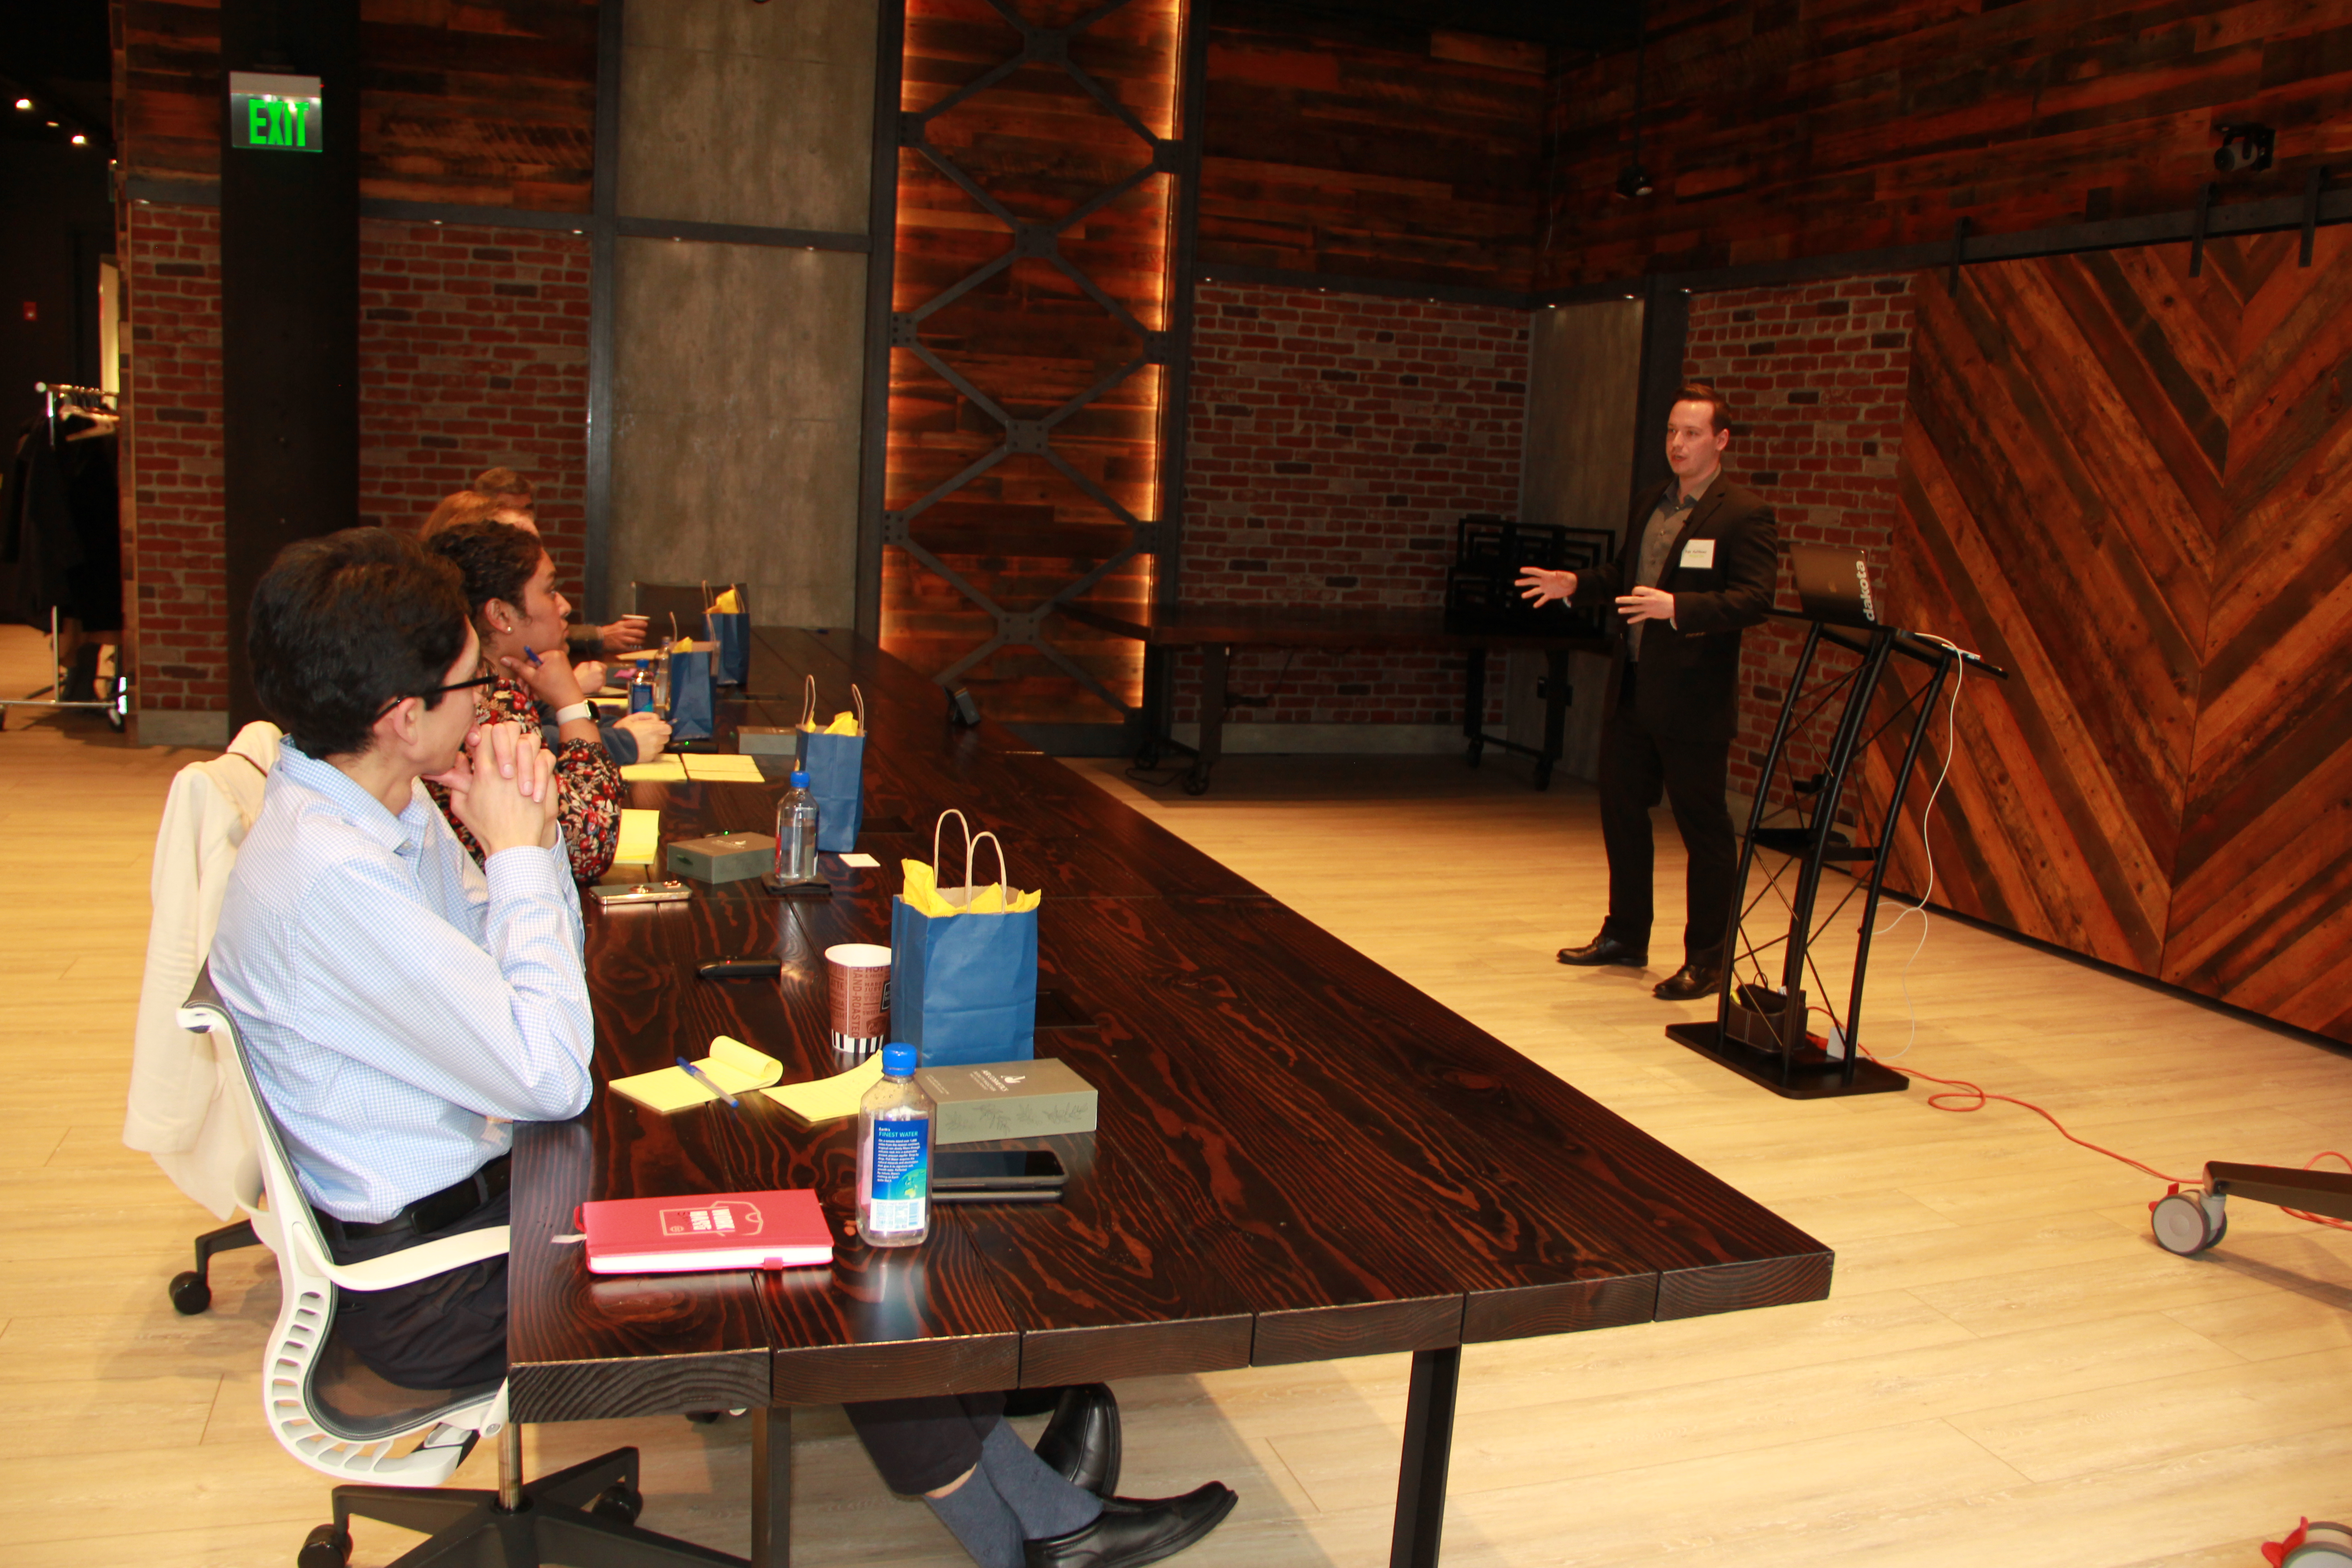 Drexel University Innovation Fund recently hosted its first in-person Pitch Day